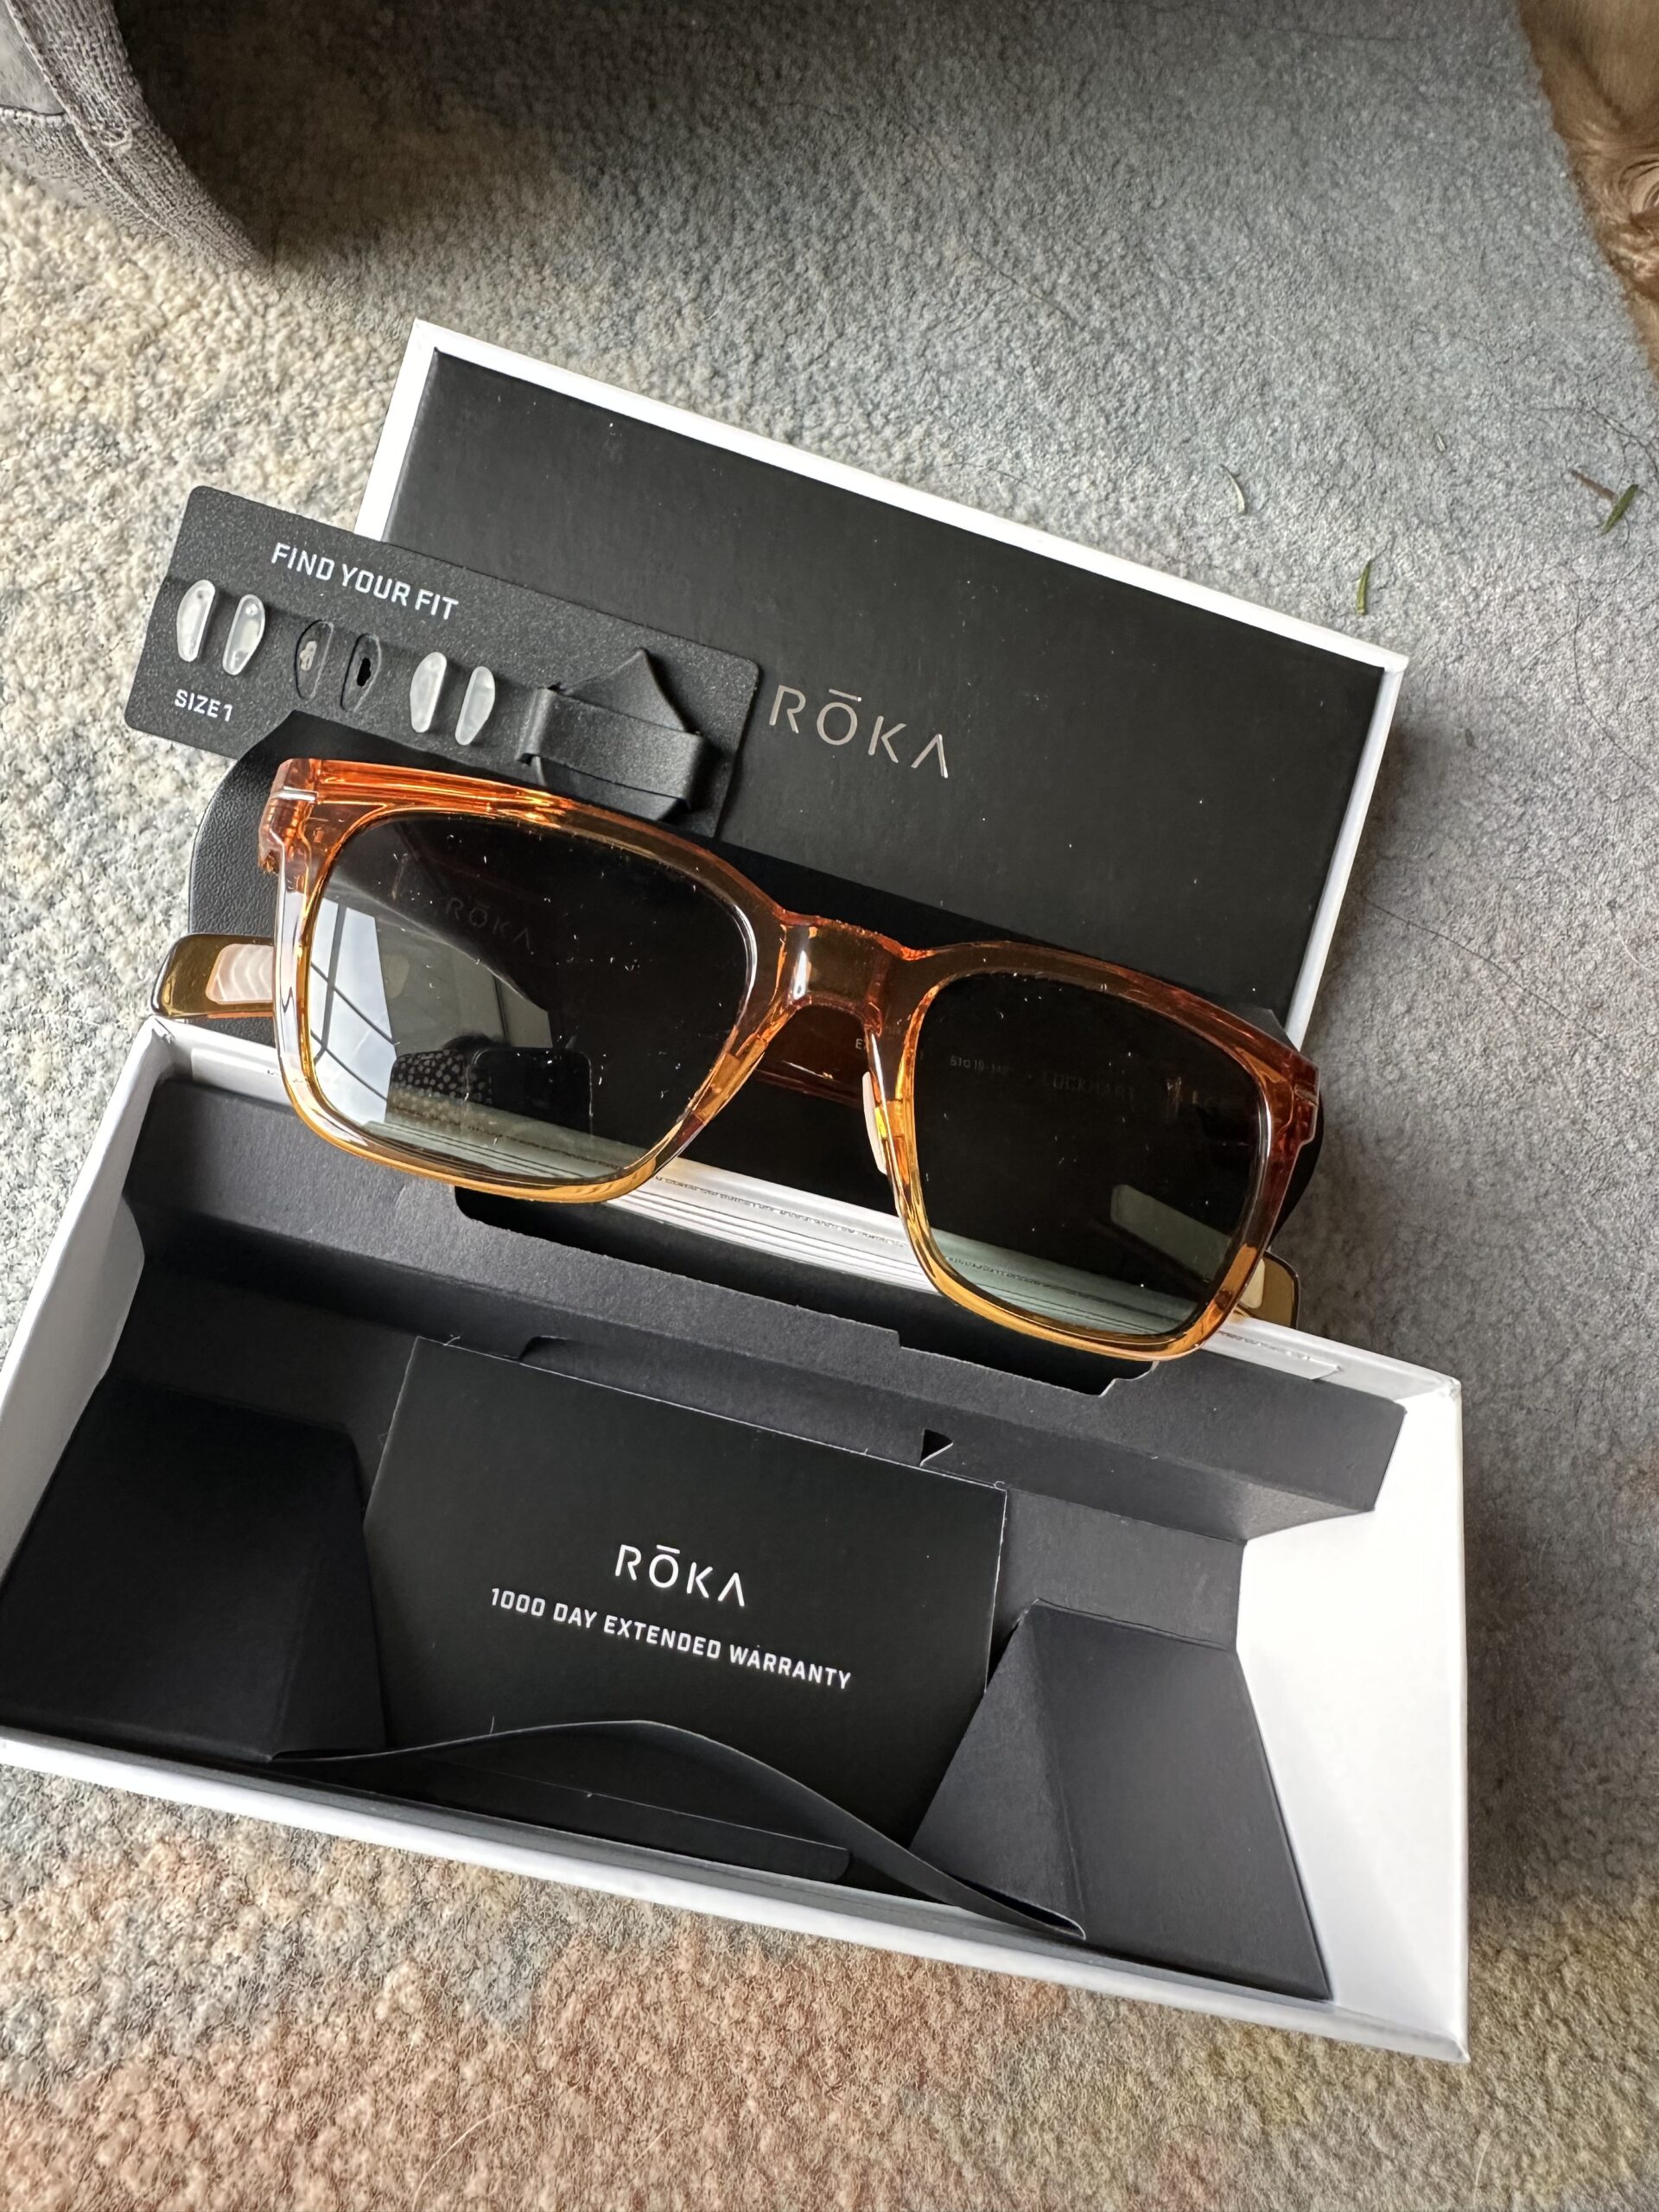 A pair of sunglasses in a box on the floor.